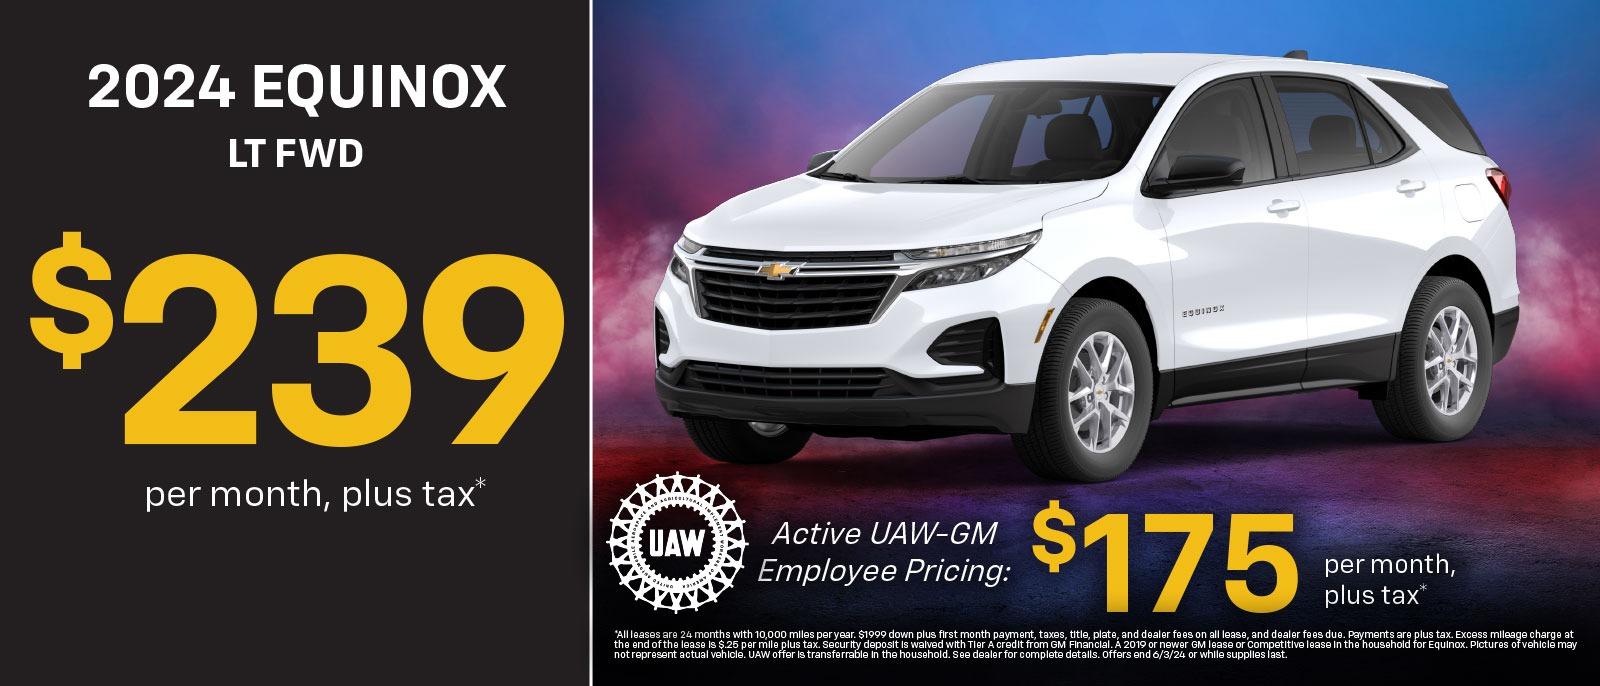 2024 Equinox LT FWD 
$239 per month, plus tax*
Active UAW-GM Employee Pricing: $175 per month plus tax*